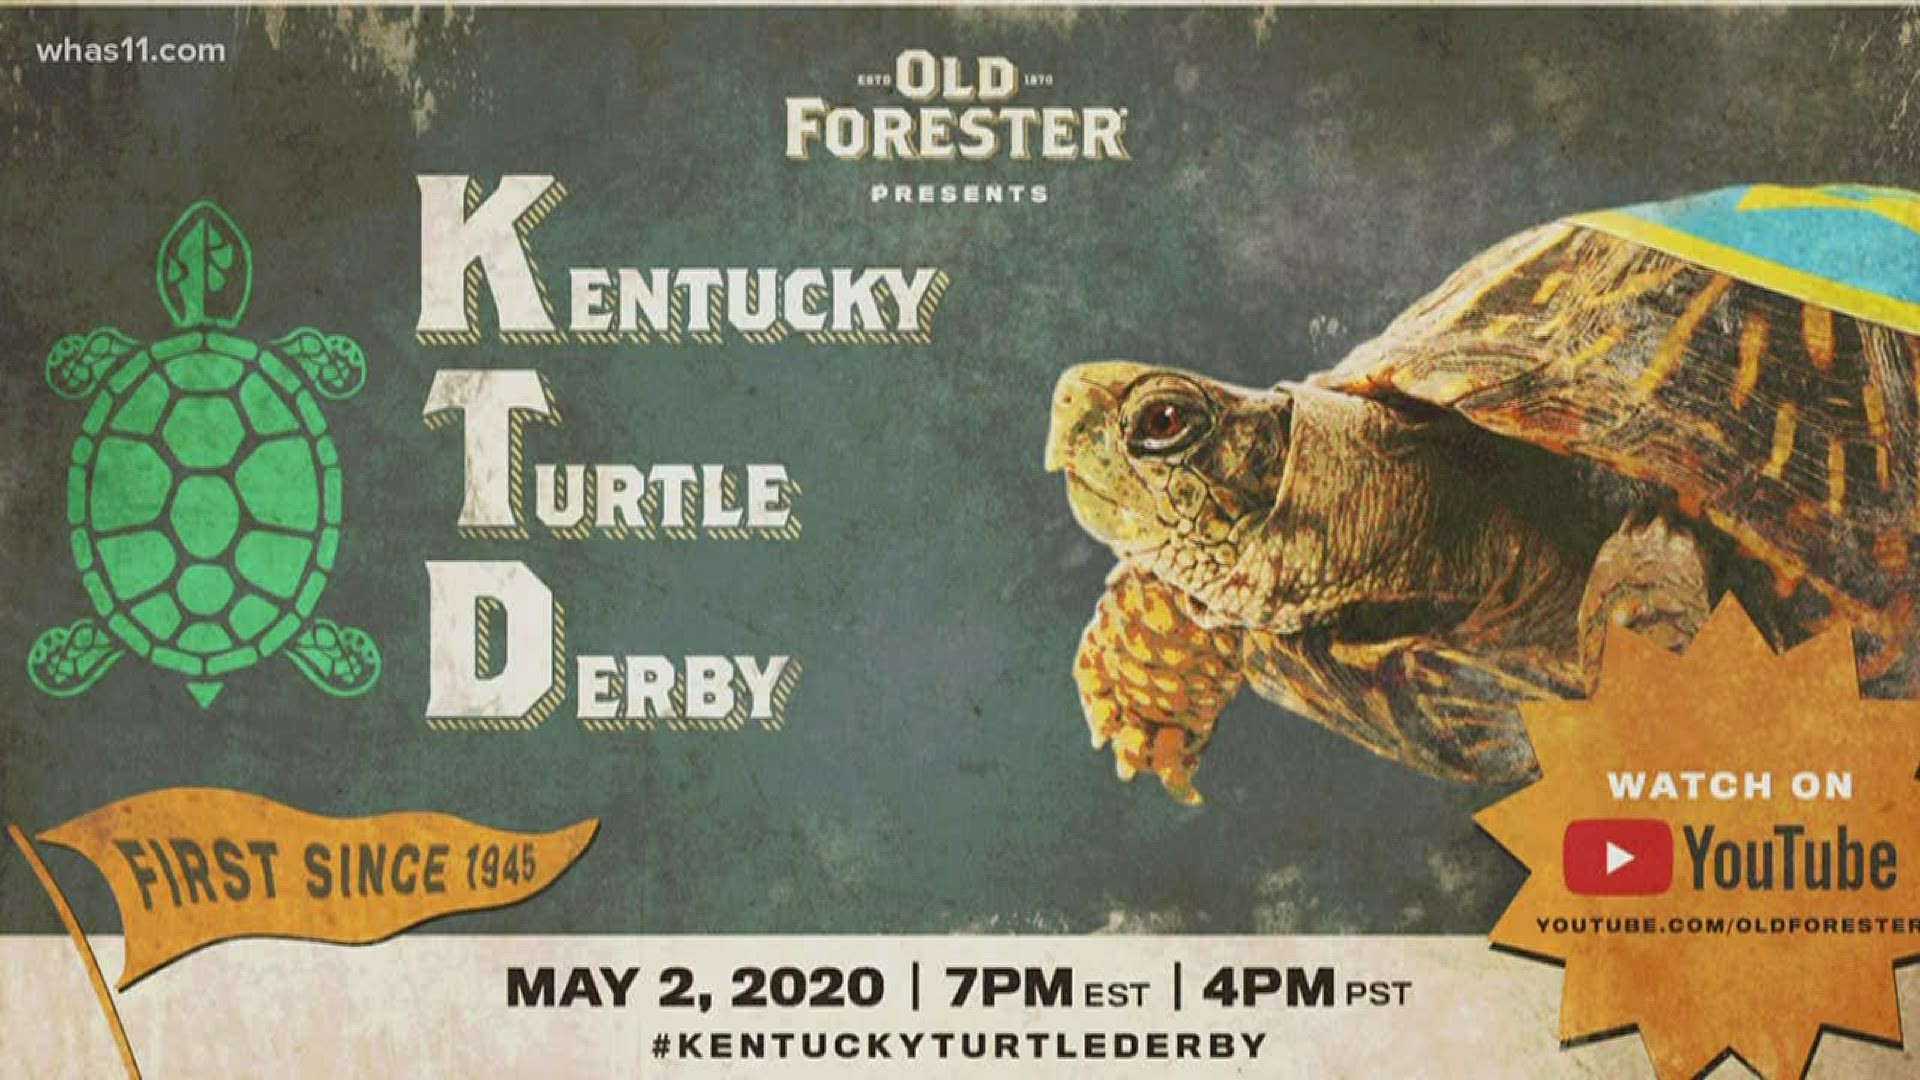 Old Forrester is hosting a turtle version of the Kentucky Derby online at 7 p.m.